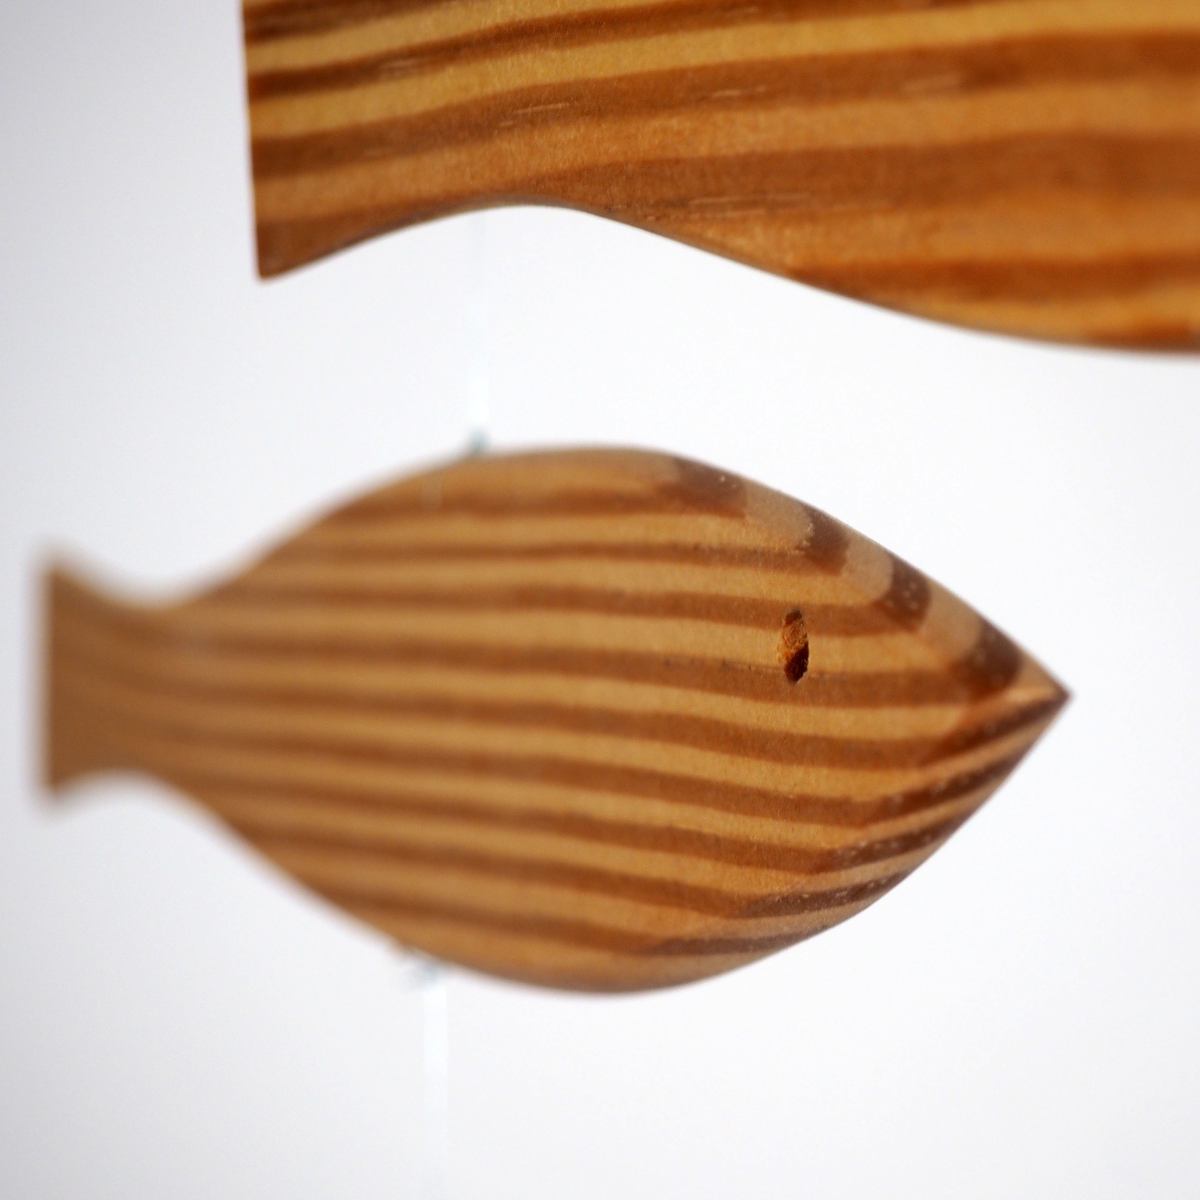 Art mobile "Floating Fish" made of pitch-pine